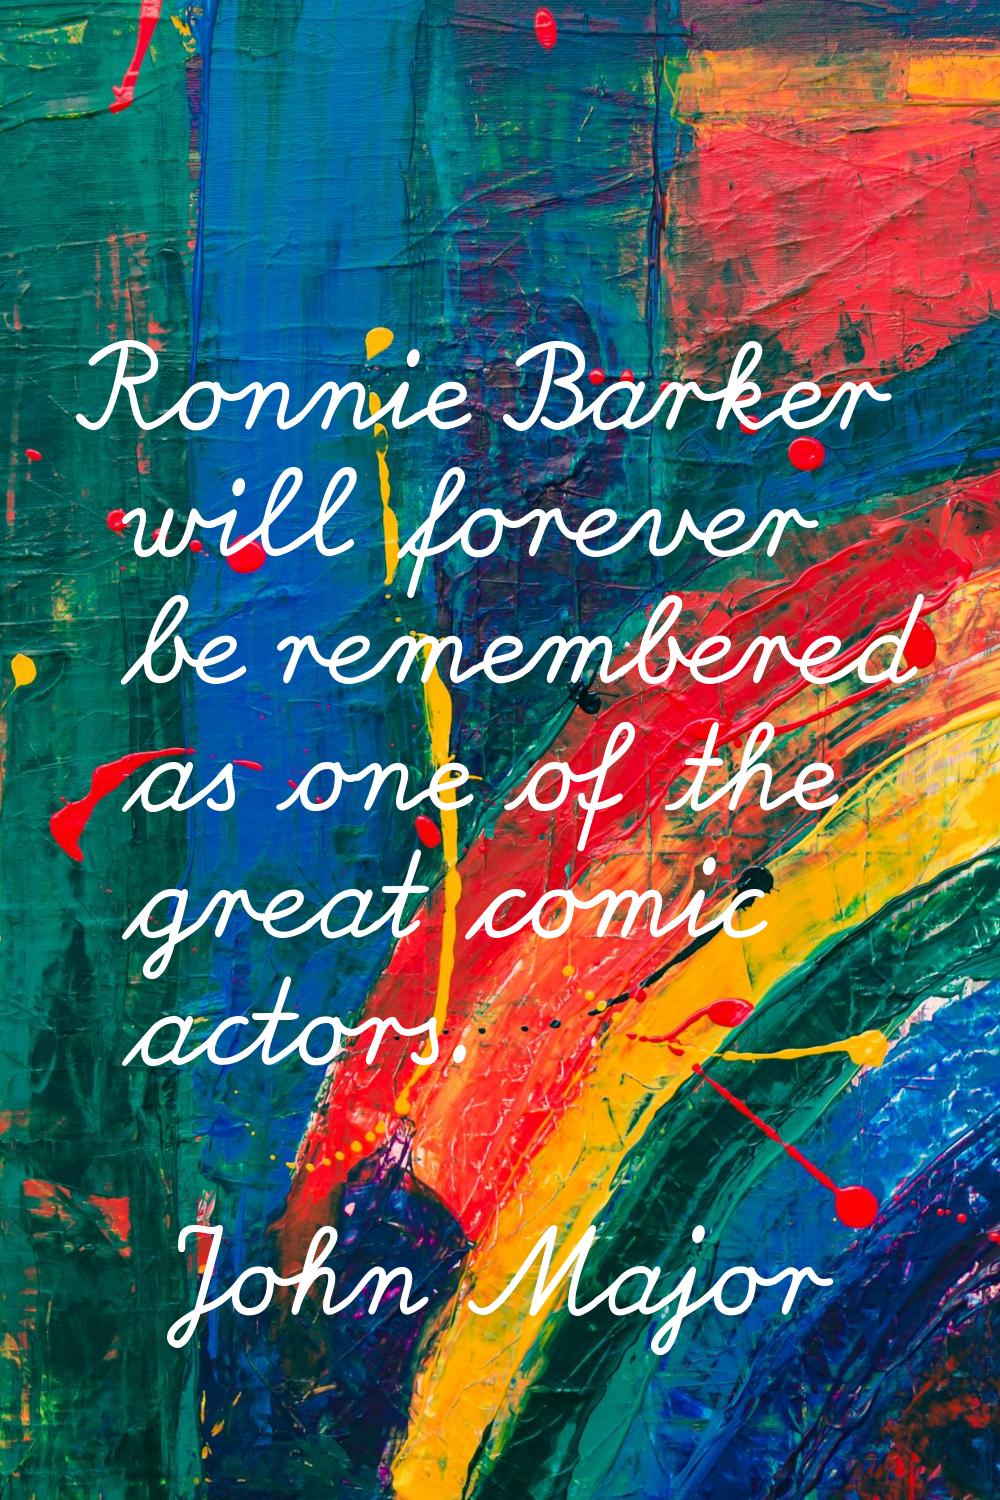 Ronnie Barker will forever be remembered as one of the great comic actors.